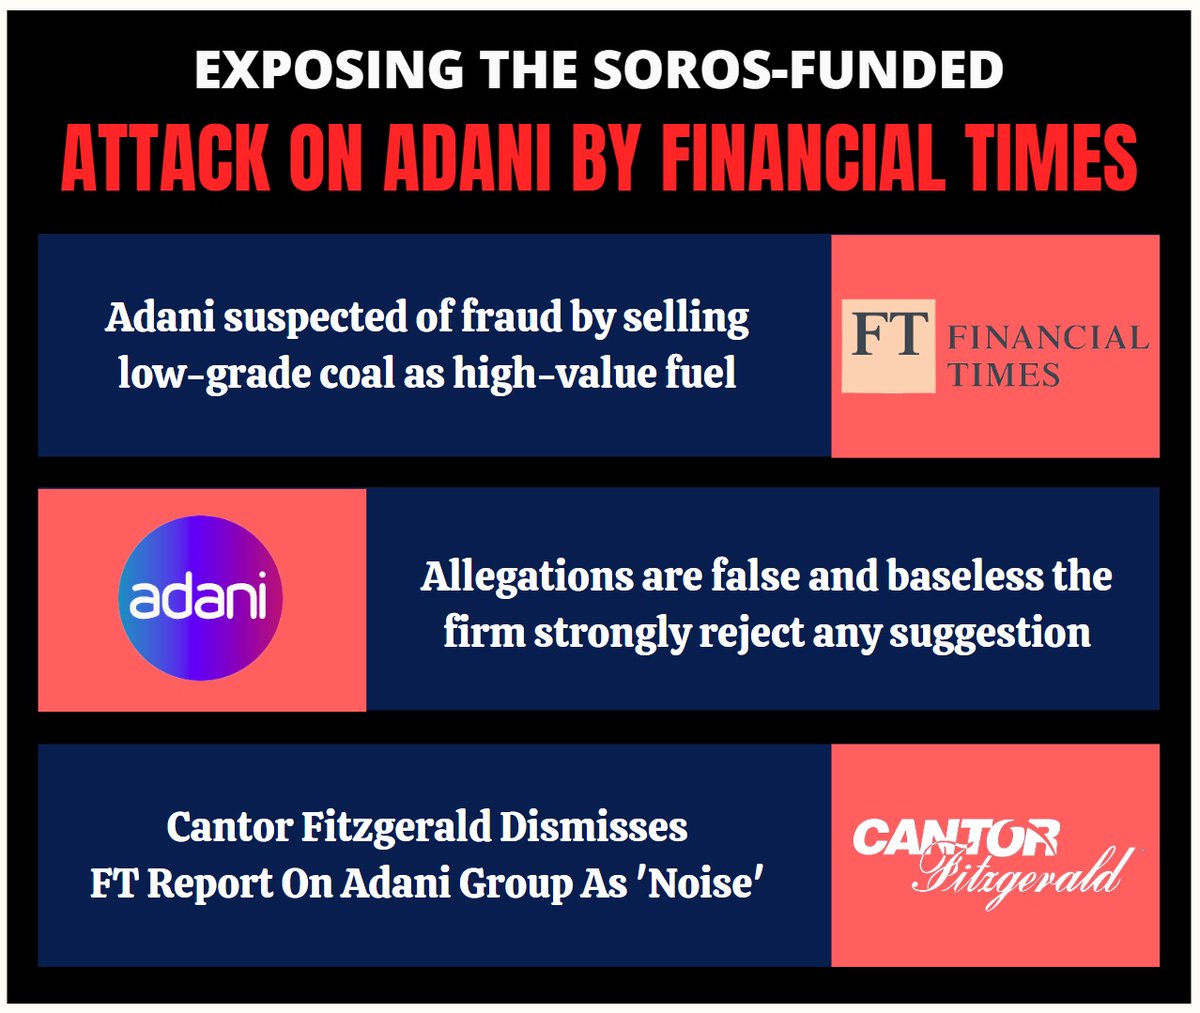 Thread🧵
Exposing The Soros-Funded Attack on Adani by Financial Times.

Foreign media @FinancialTimes report against the Adani Group is a baseless attack on a reputable conglomerate. Alleging that Adani supplied inferior coal is not just wrong; it's defamatory. Here's why we call